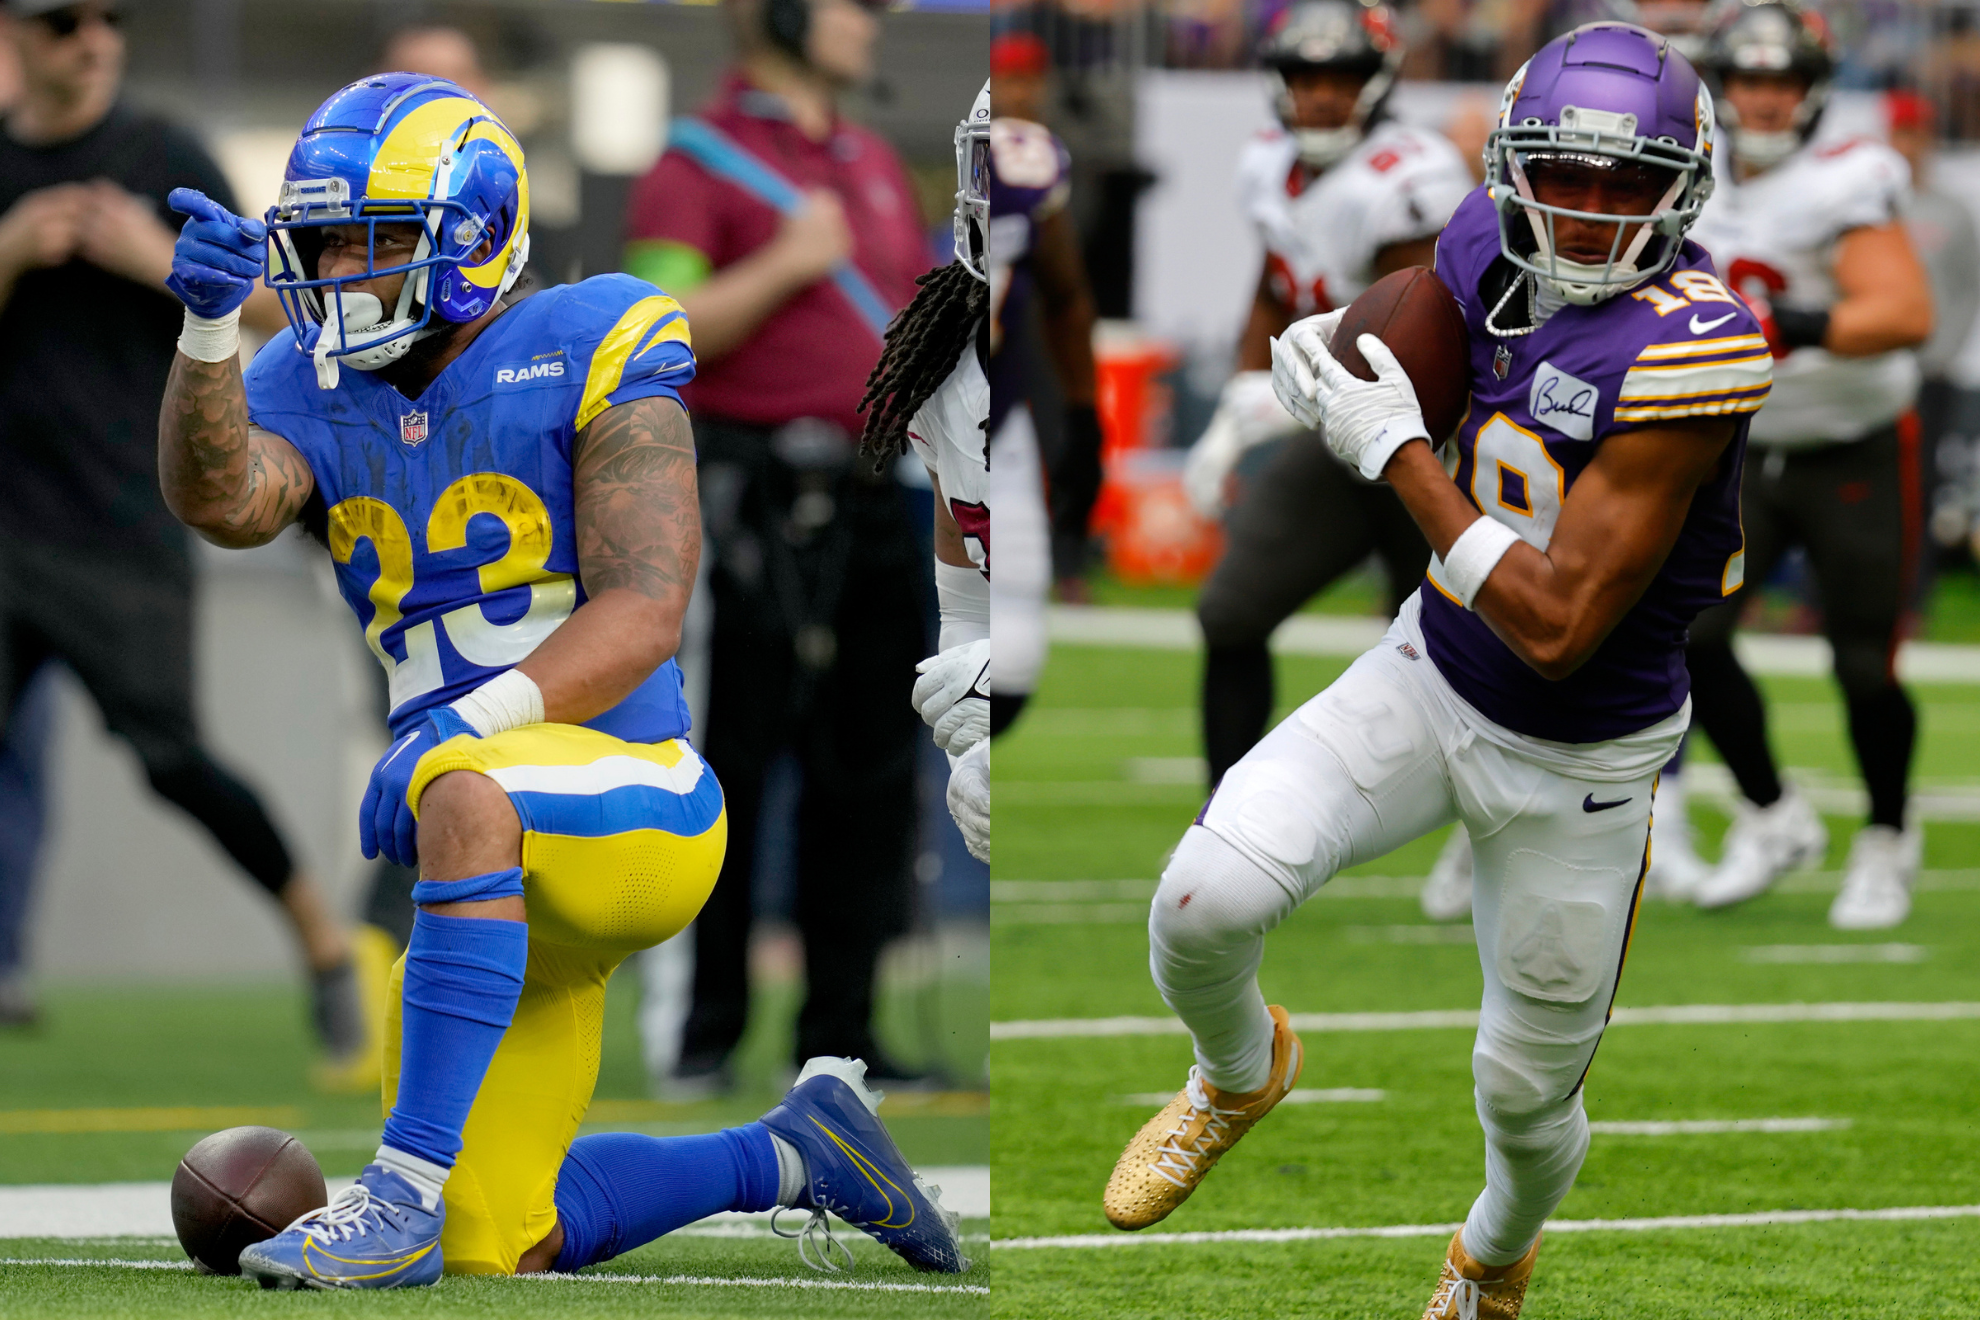 Kyren Williams and Justin Jefferson could come off of IR and win fantasy matchups in Week 12.